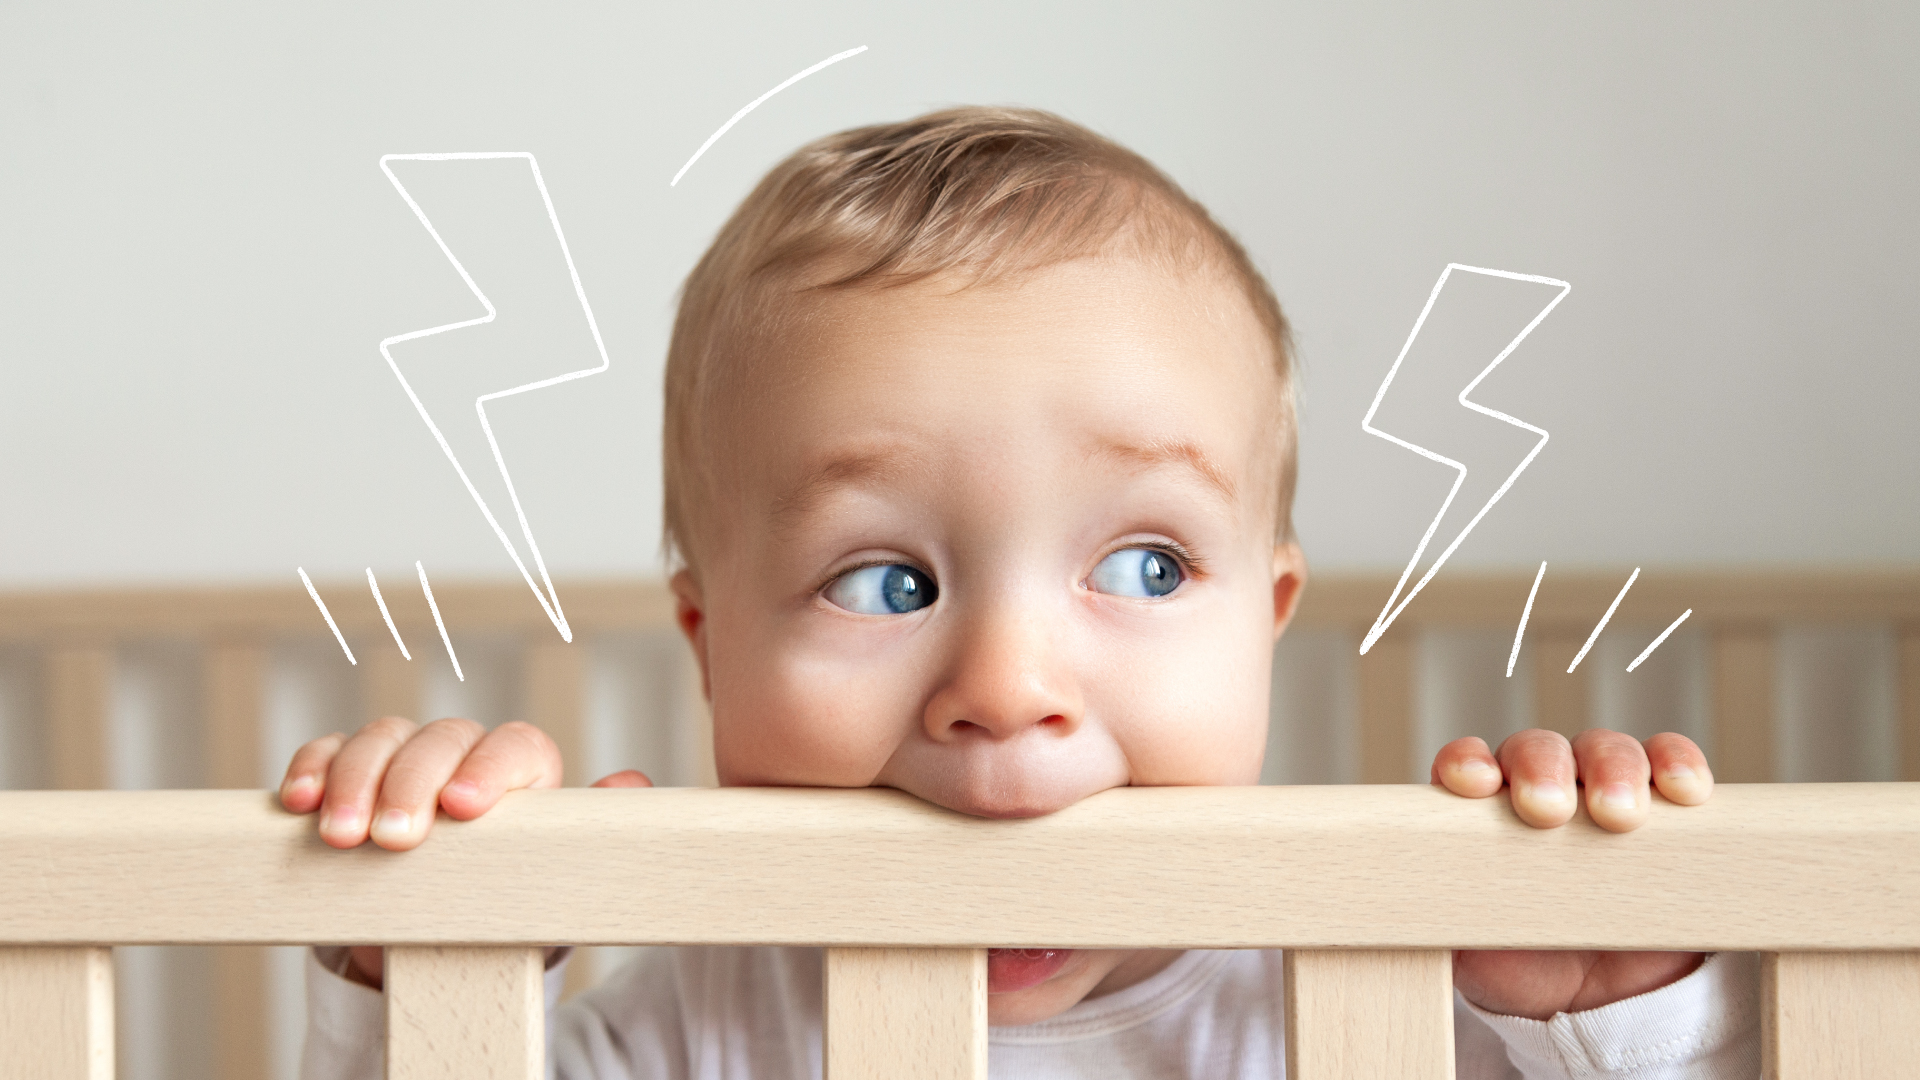 Tips on How to Respond to Your Toddler’s Tantrums